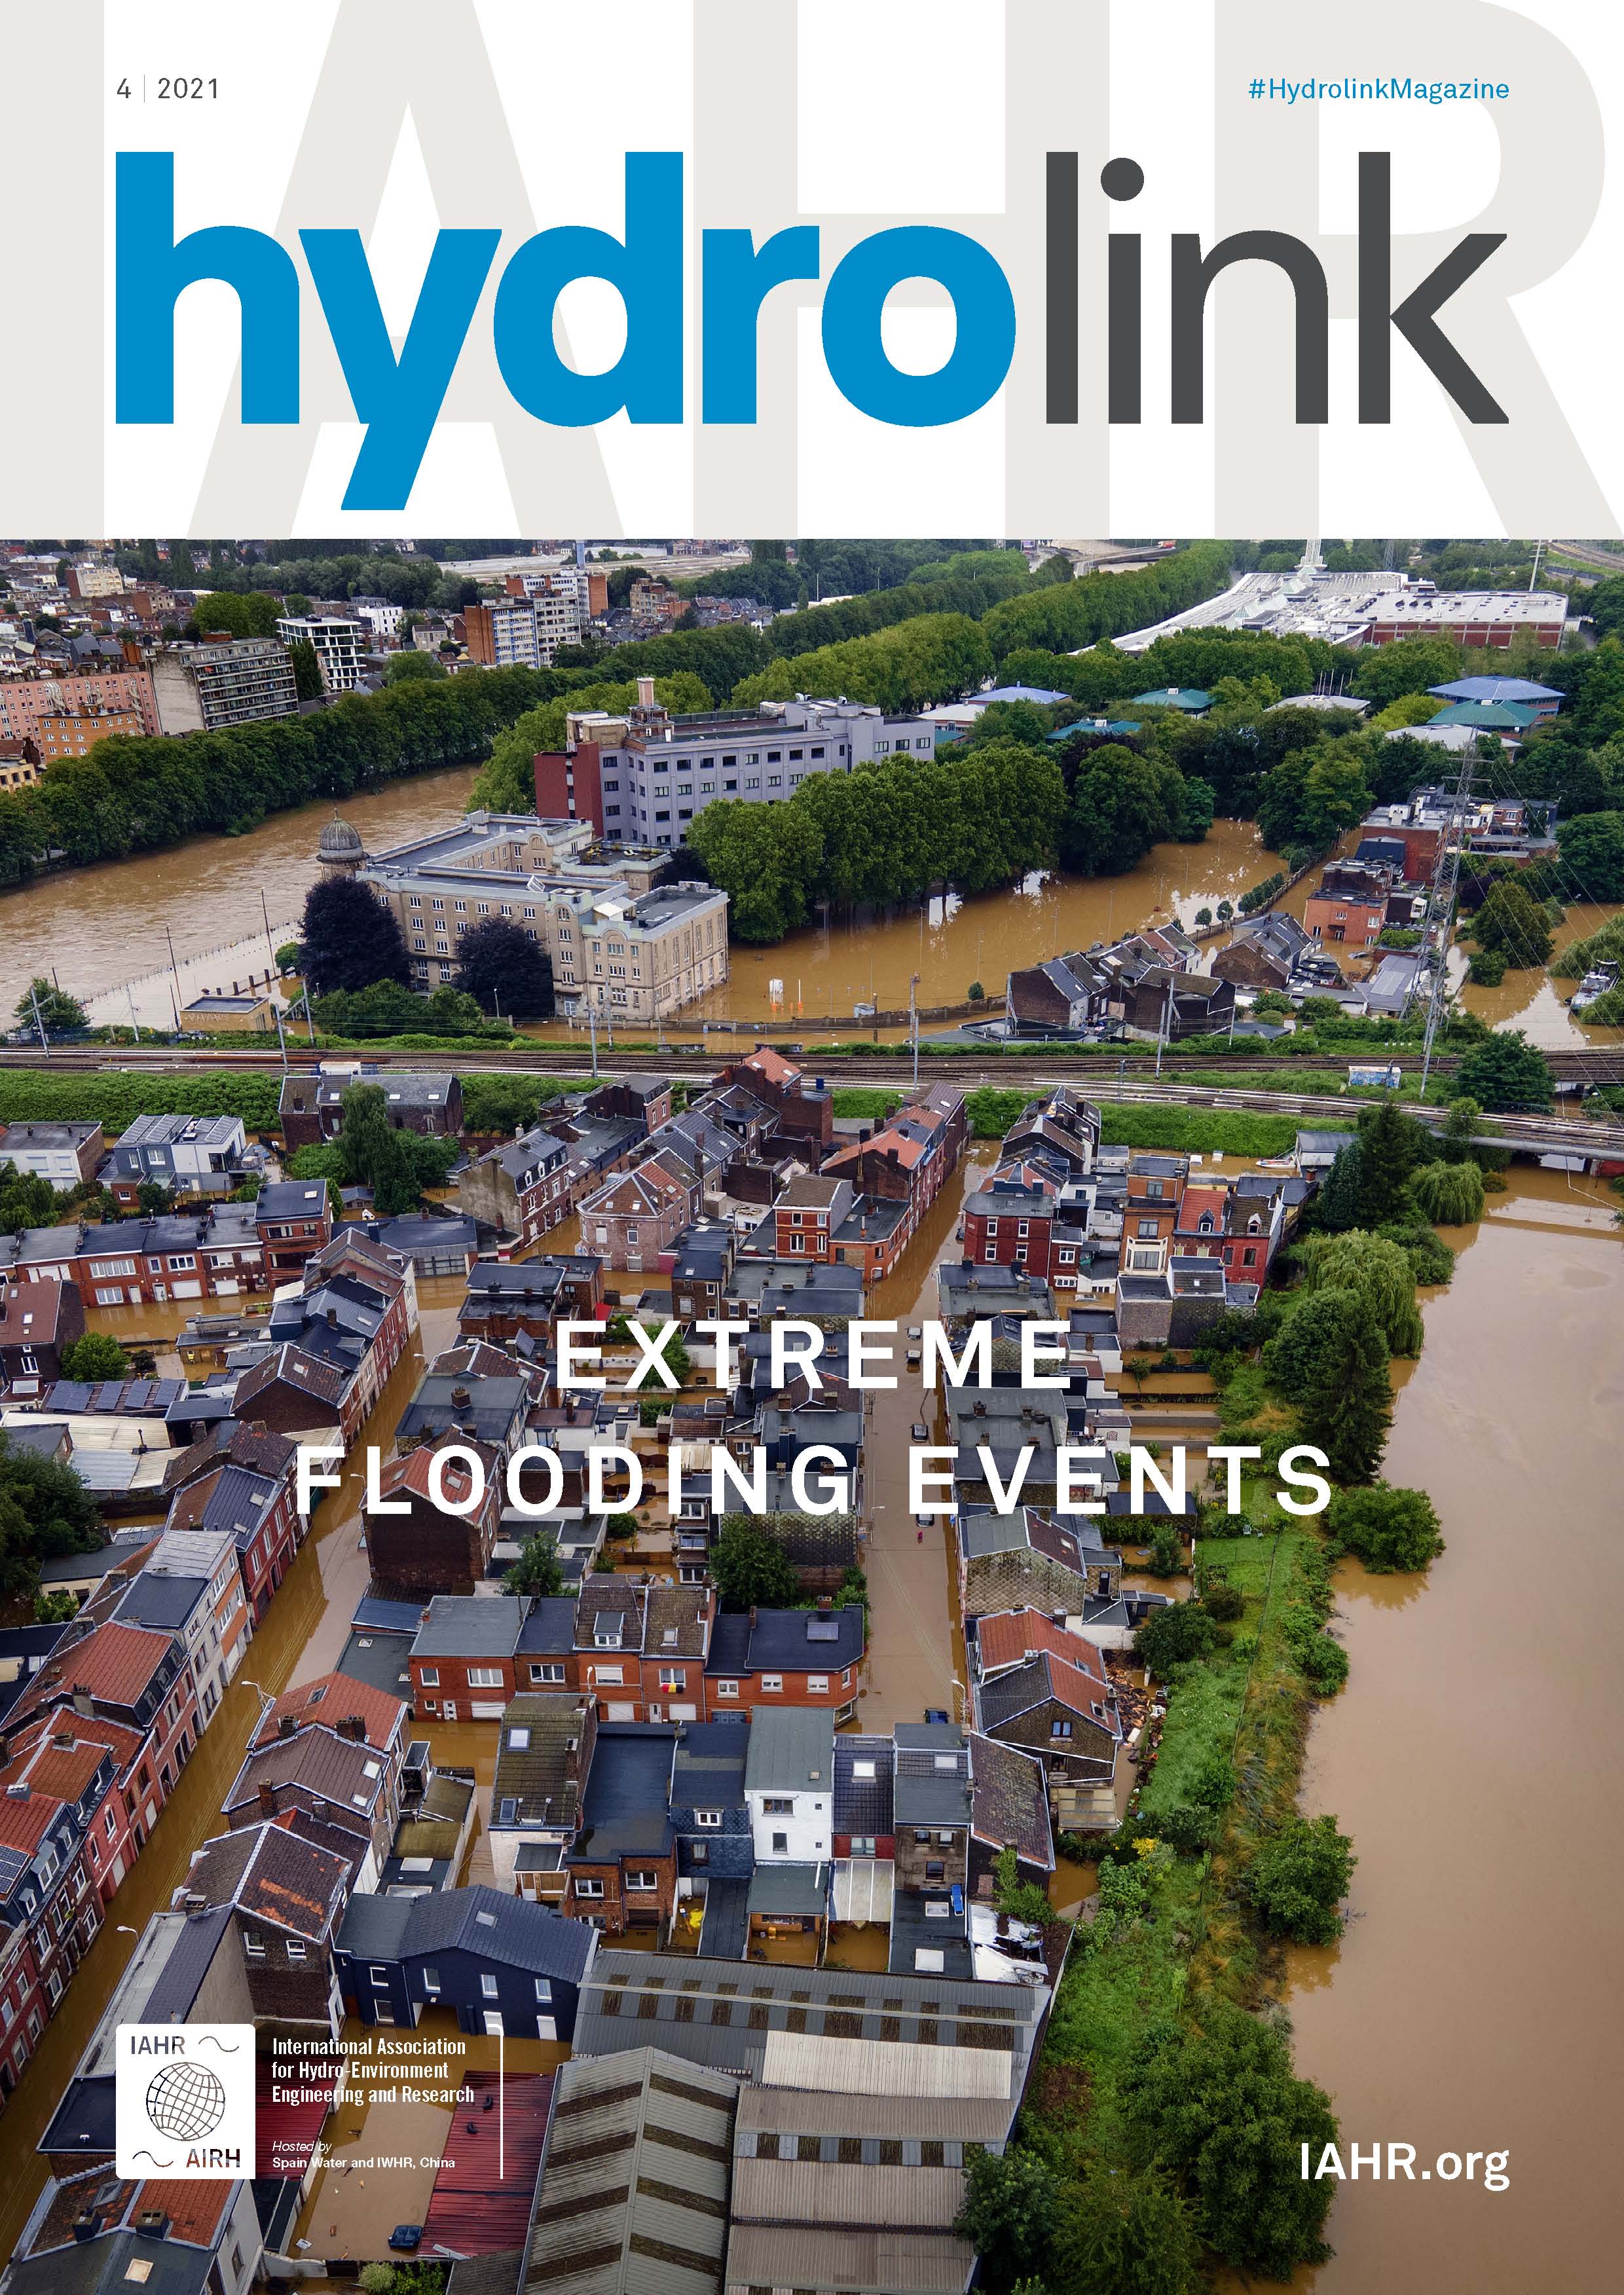 Hydrolink issue 4, 2021. Special issue on Extreme Flooding Events